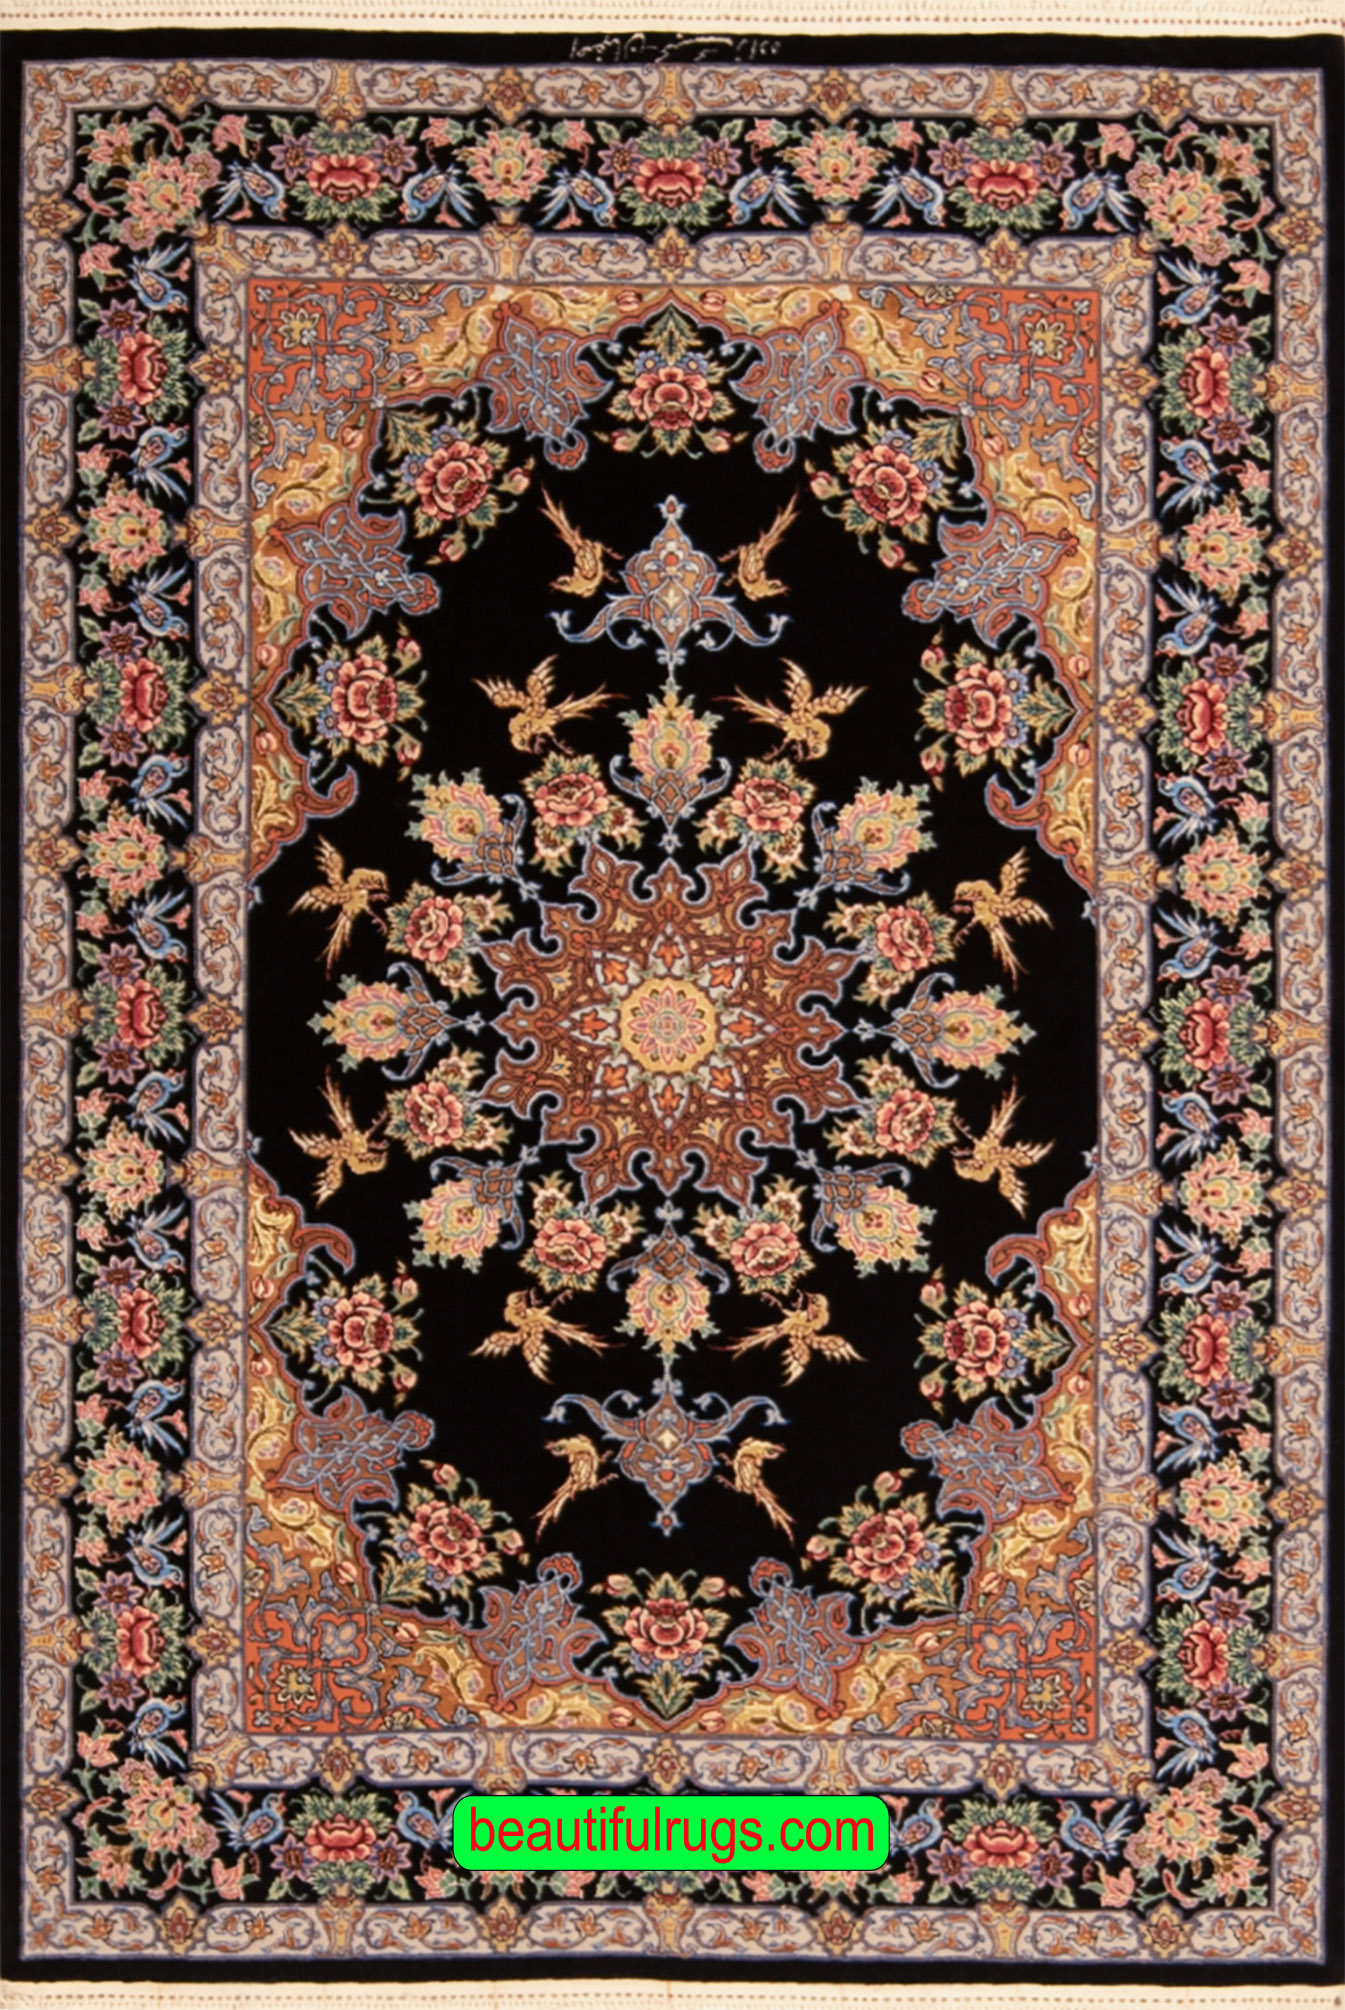 Persian Isfahan Rug with Black and Gold colors. Size 3.6x5.